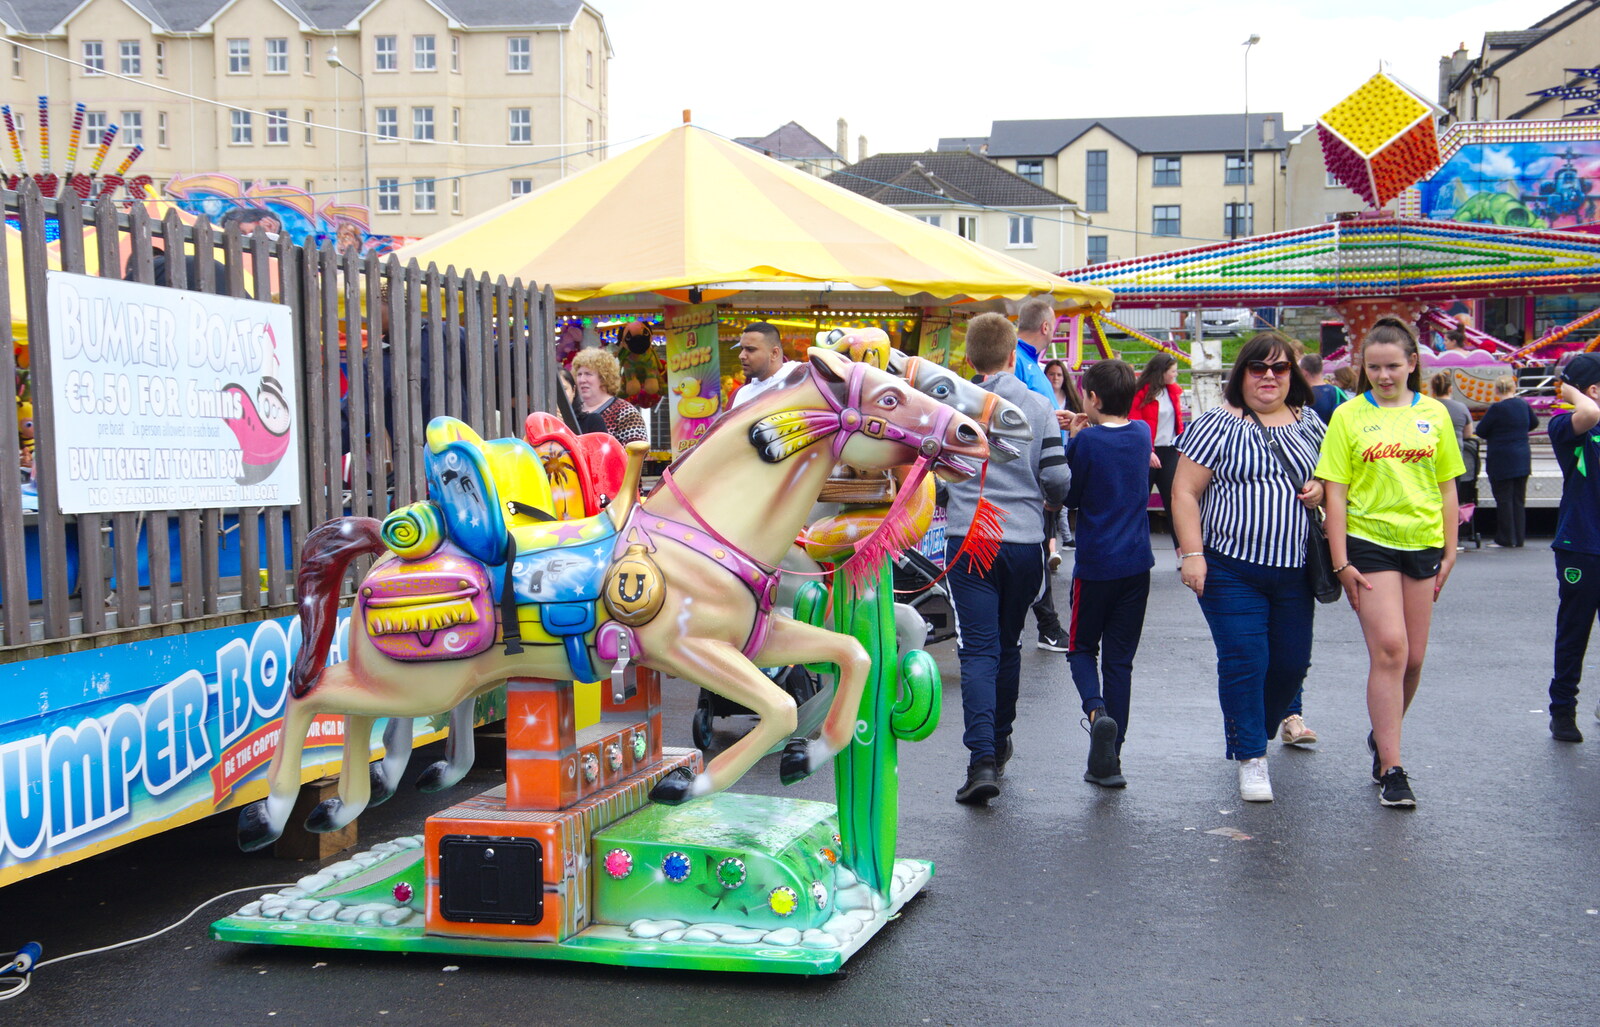 Fairground horses from A Day in Derry, County Londonderry, Northern Ireland - 15th August 2019